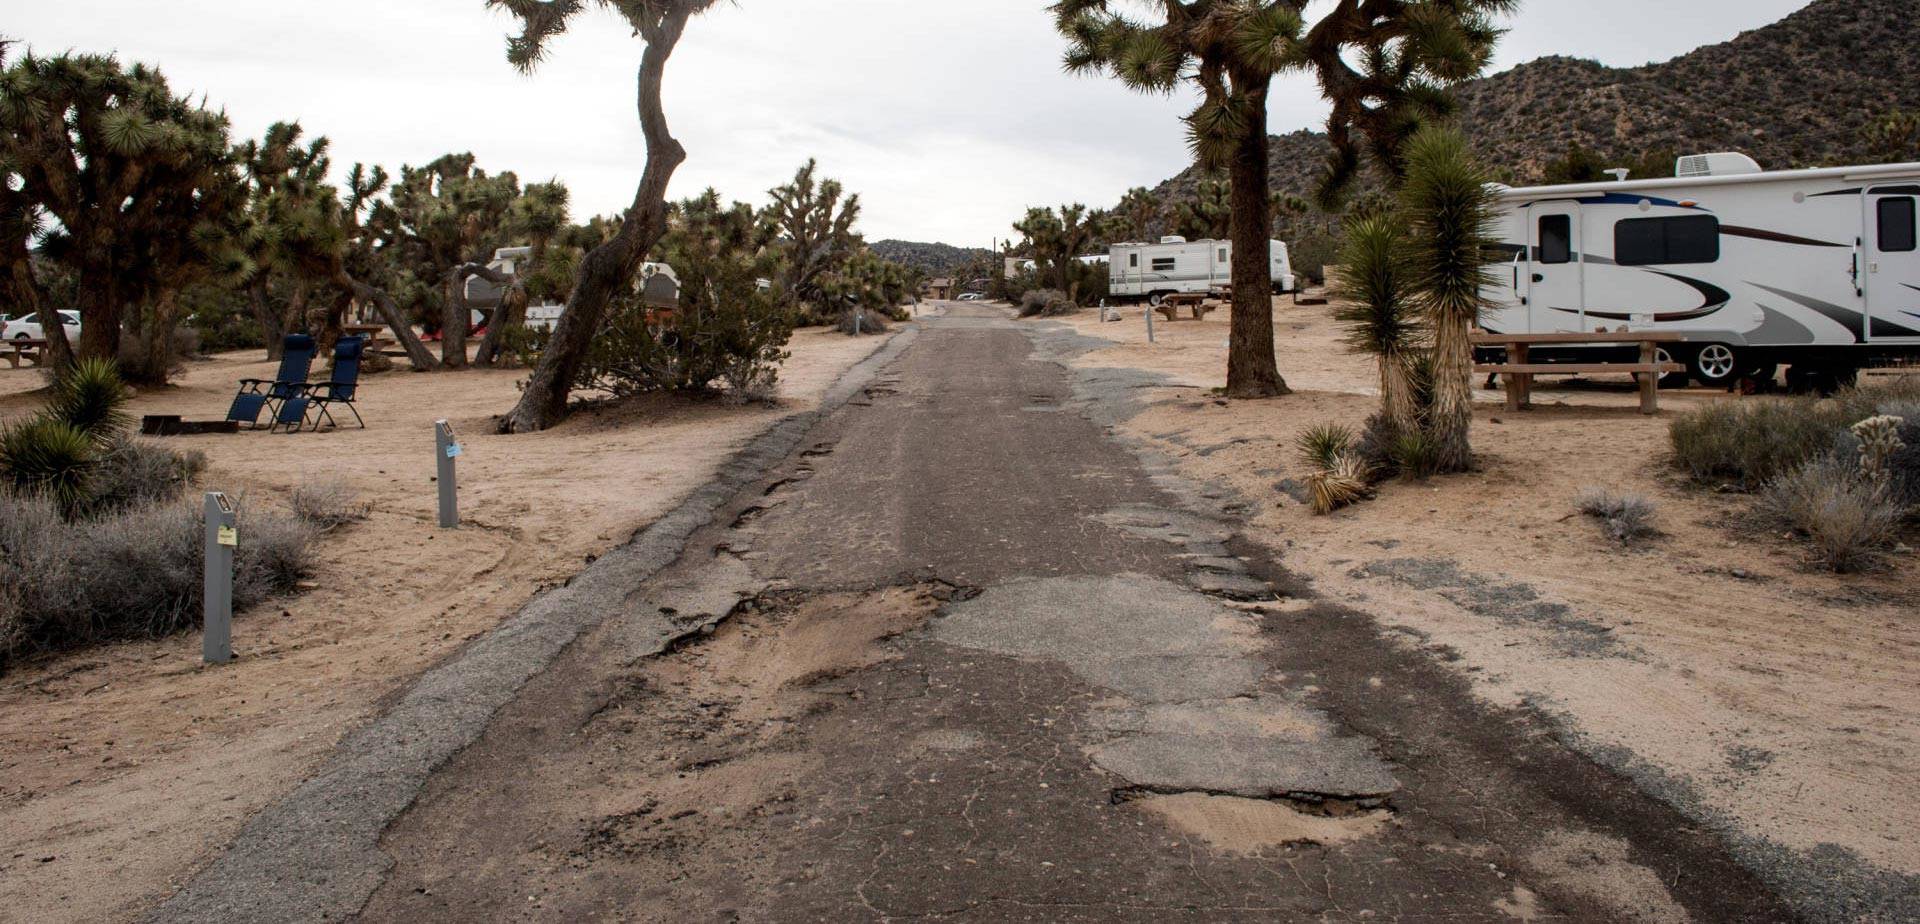 Flooding and the combined traffic of thousands of cars, trucks and RVs have torn up the roads at Joshua Tree National Park's Black Rock Canyon Campground. The majority of the park's $60 million maintenance backlog is for roads like this. Nathan Rott/NPR